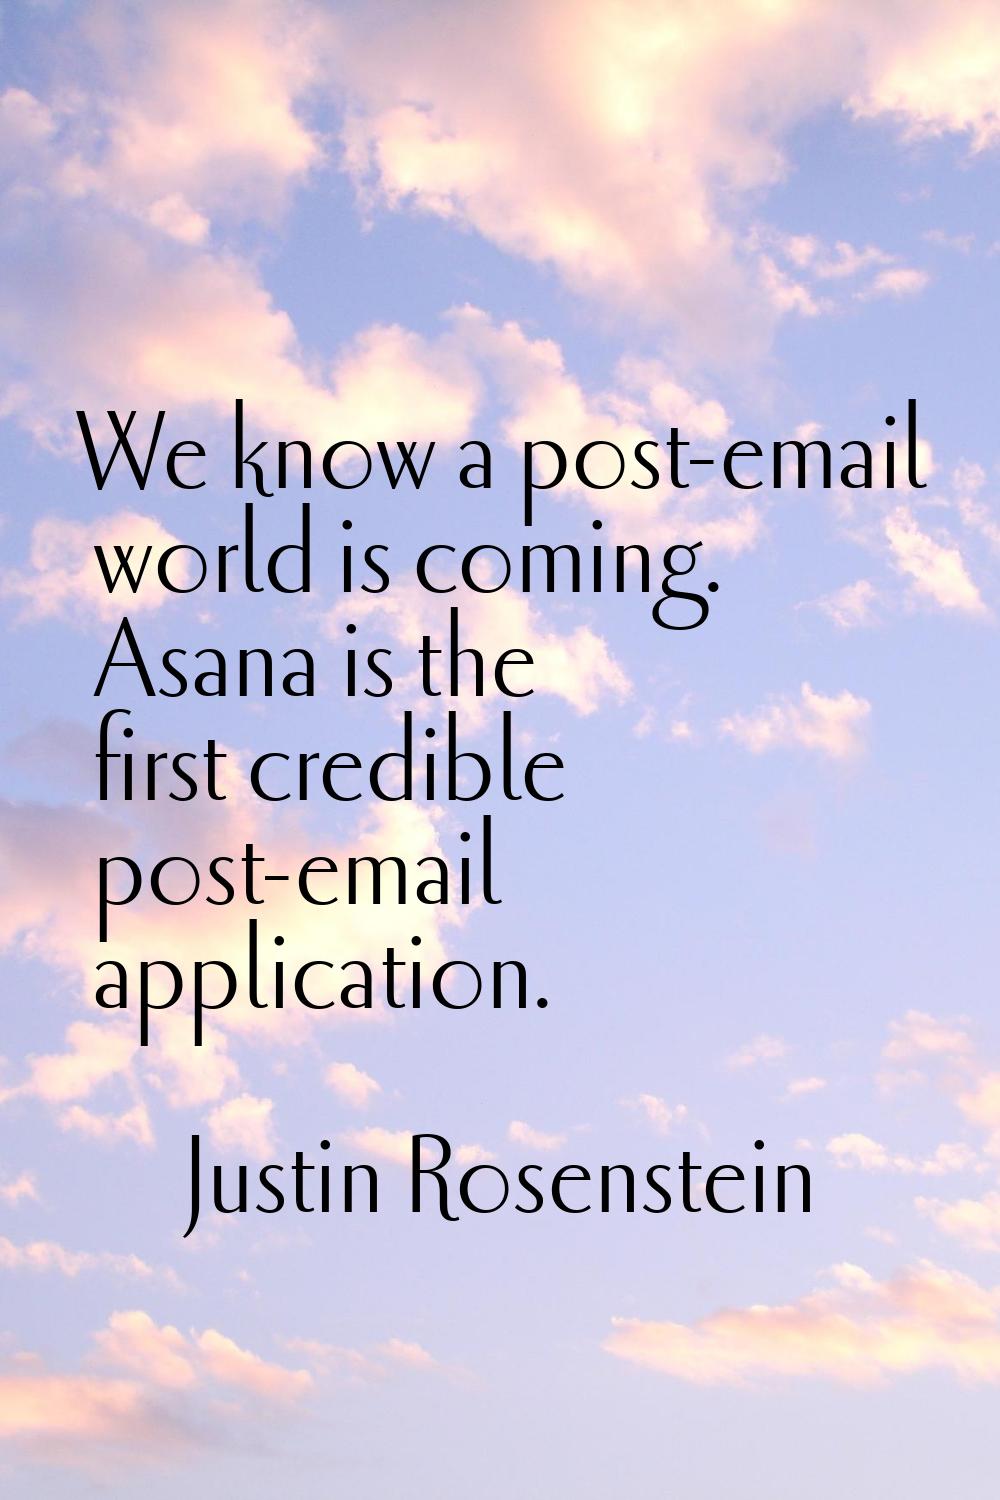 We know a post-email world is coming. Asana is the first credible post-email application.